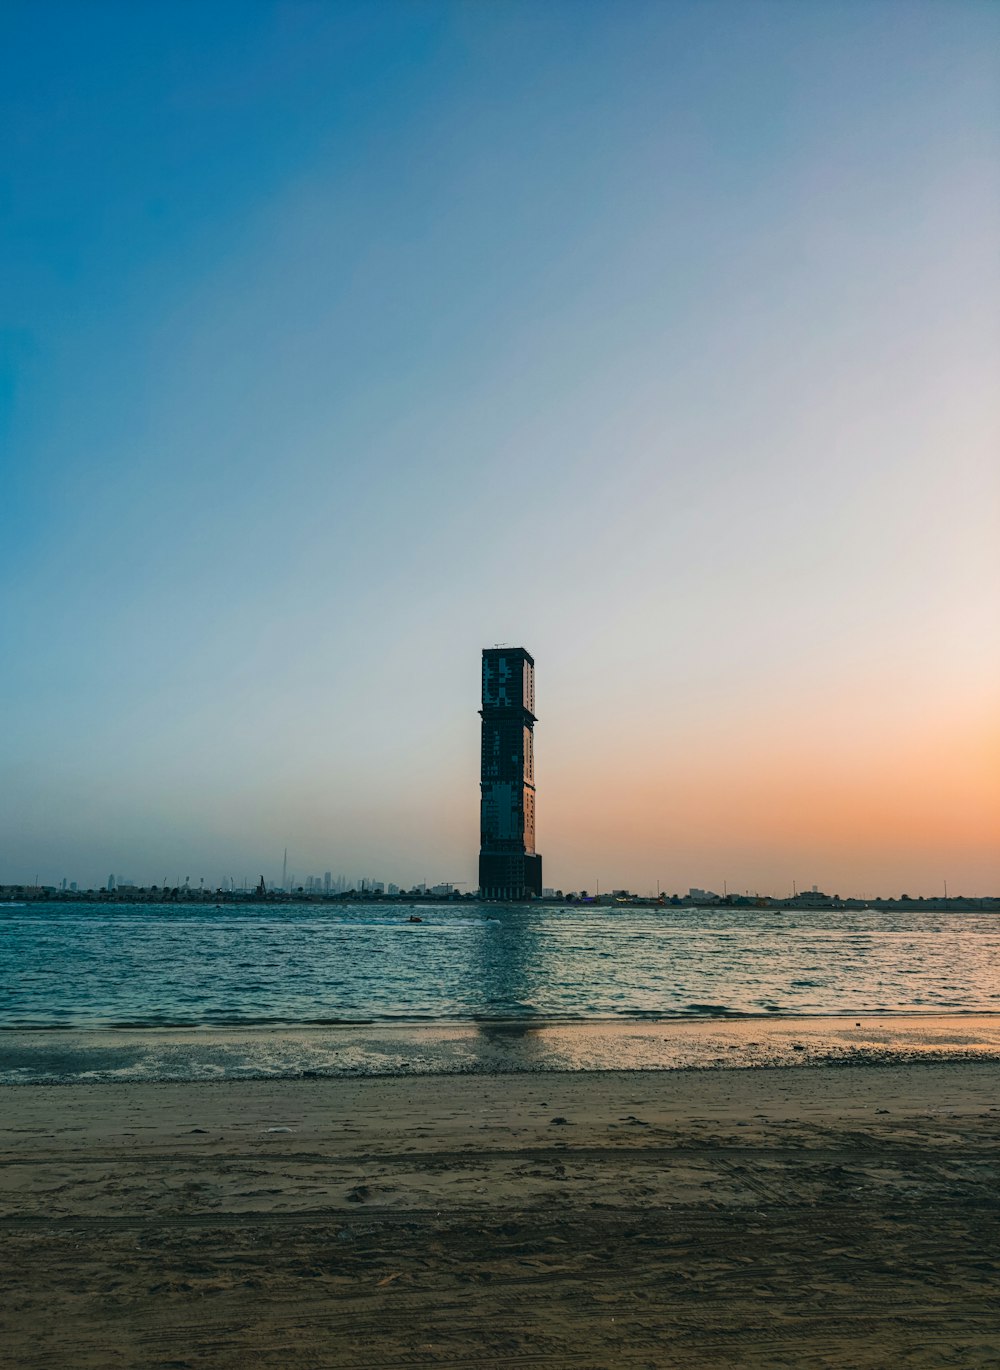 a tall tower sitting in the middle of a body of water